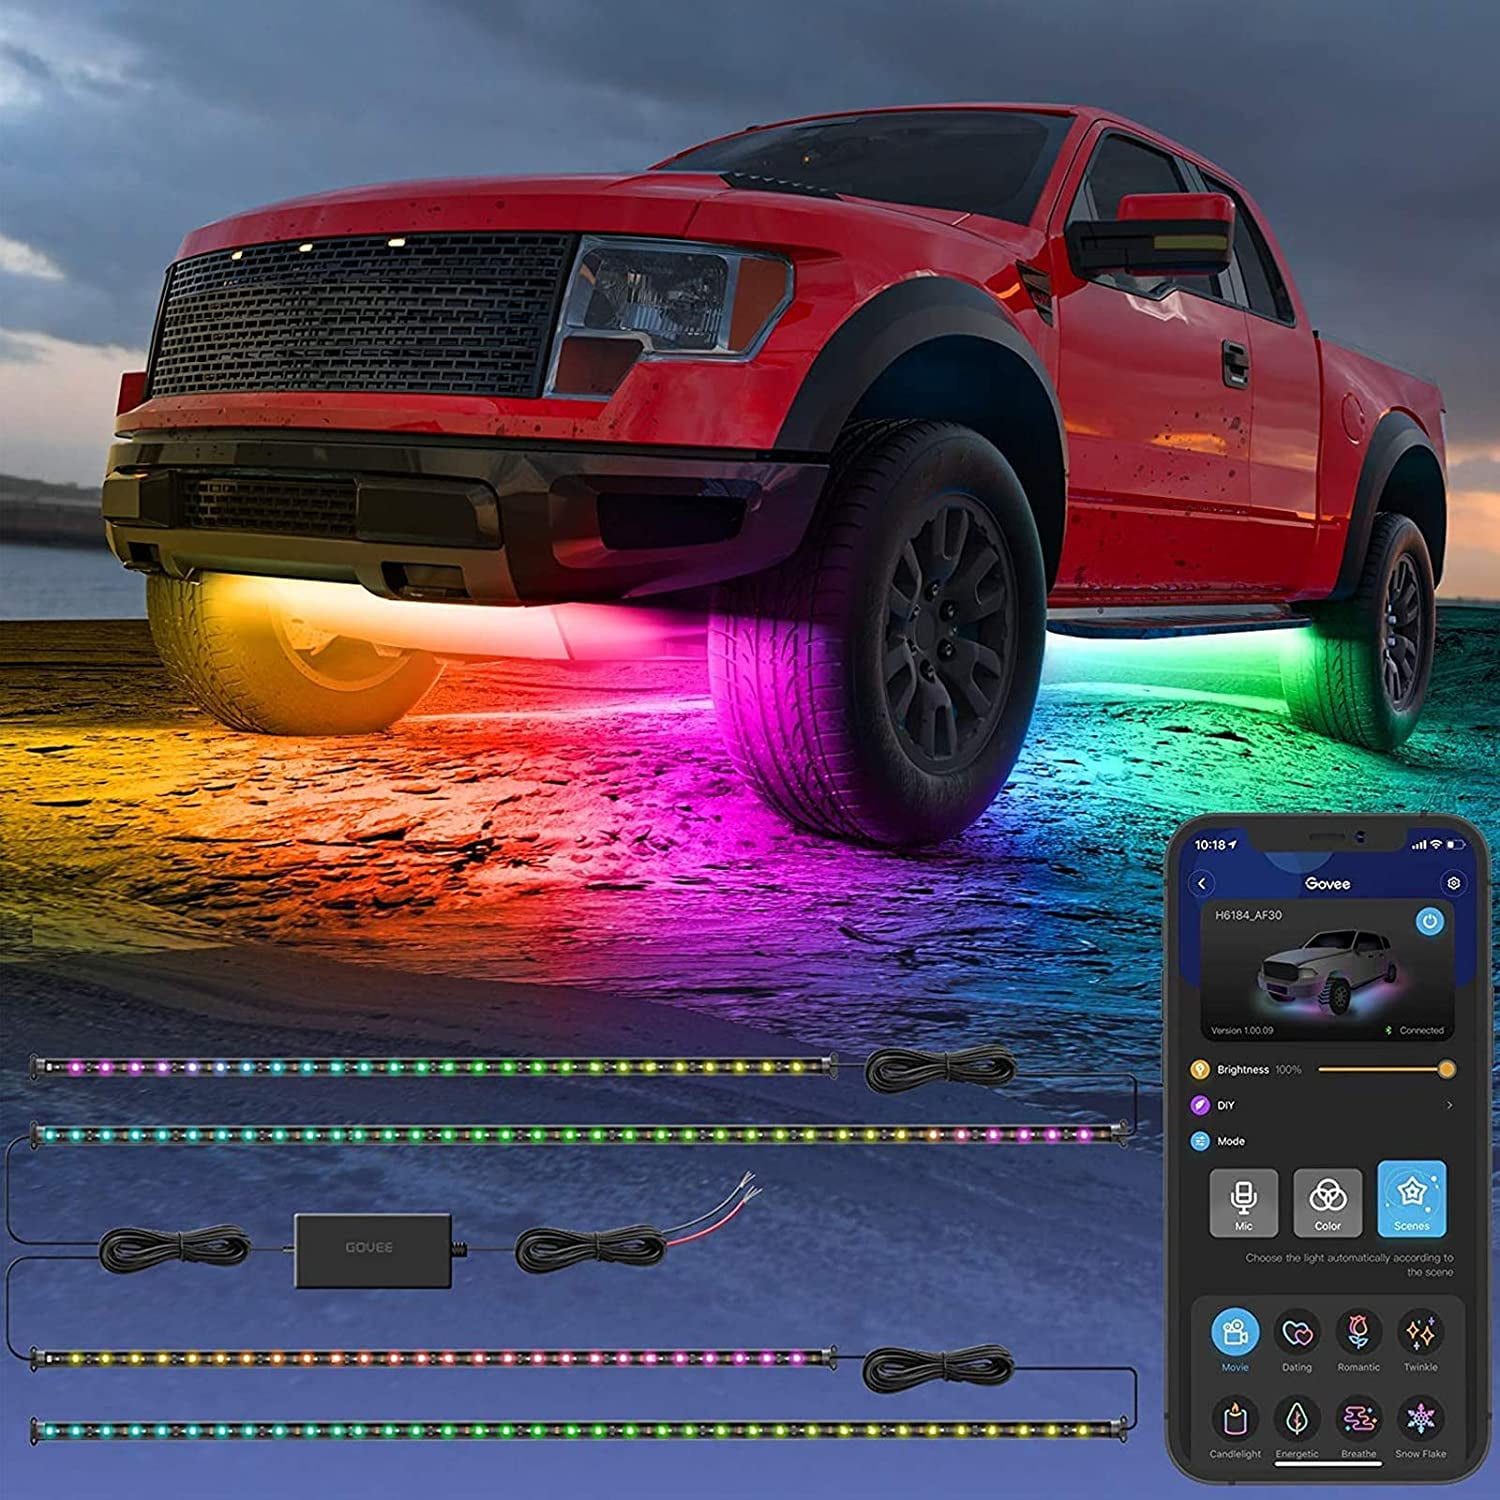 Trucks 2 Lines Design 7 Scene Modes DIY and Music Mode for SUVs DC 12V Jeep Exterior Car LED Lights 16 Million Colors FOVAL RGB Underglow Car Lights Waterproof with APP and RF Remote Control 